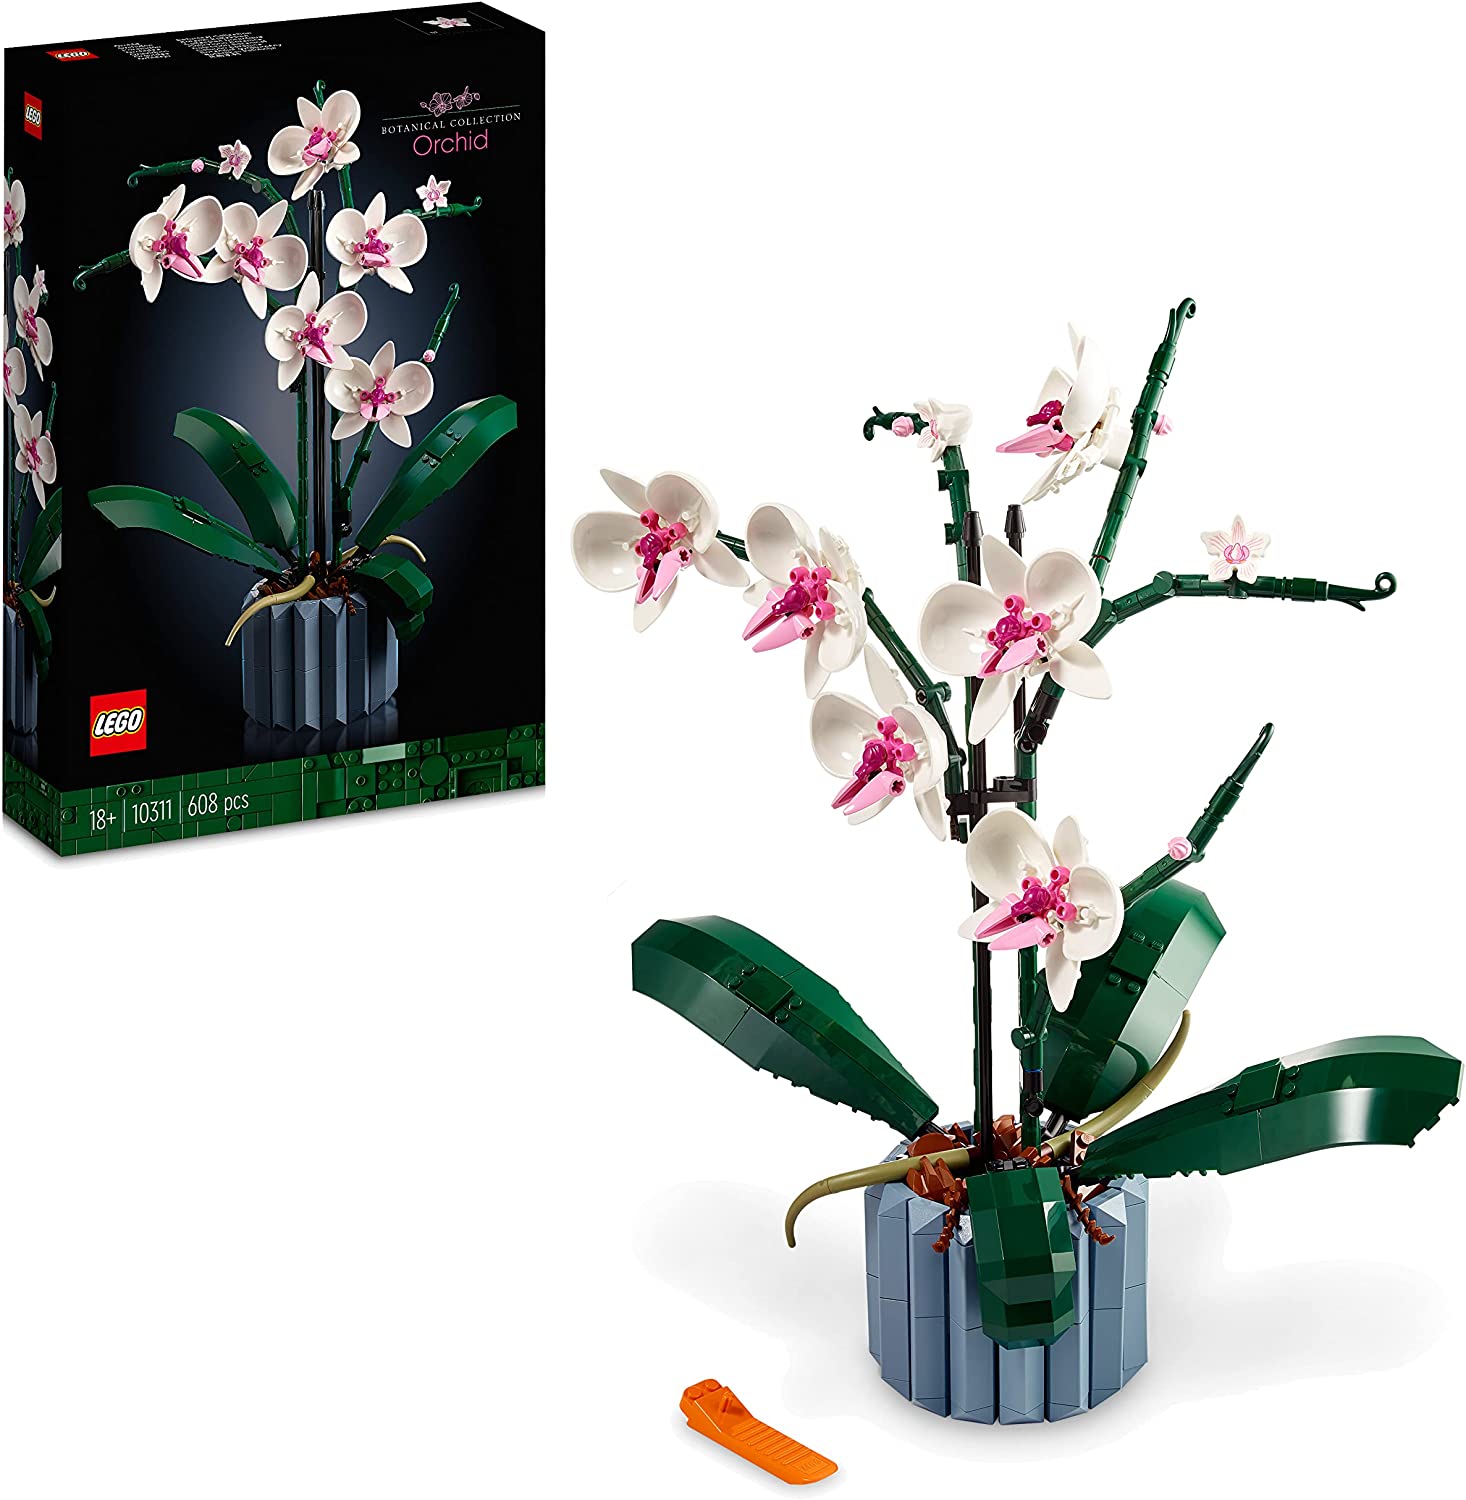 LEGO 10311 Orchid Set for Adults for Crafting Room Decoration with Artificial Plants, Botanical Collection Home Decoration